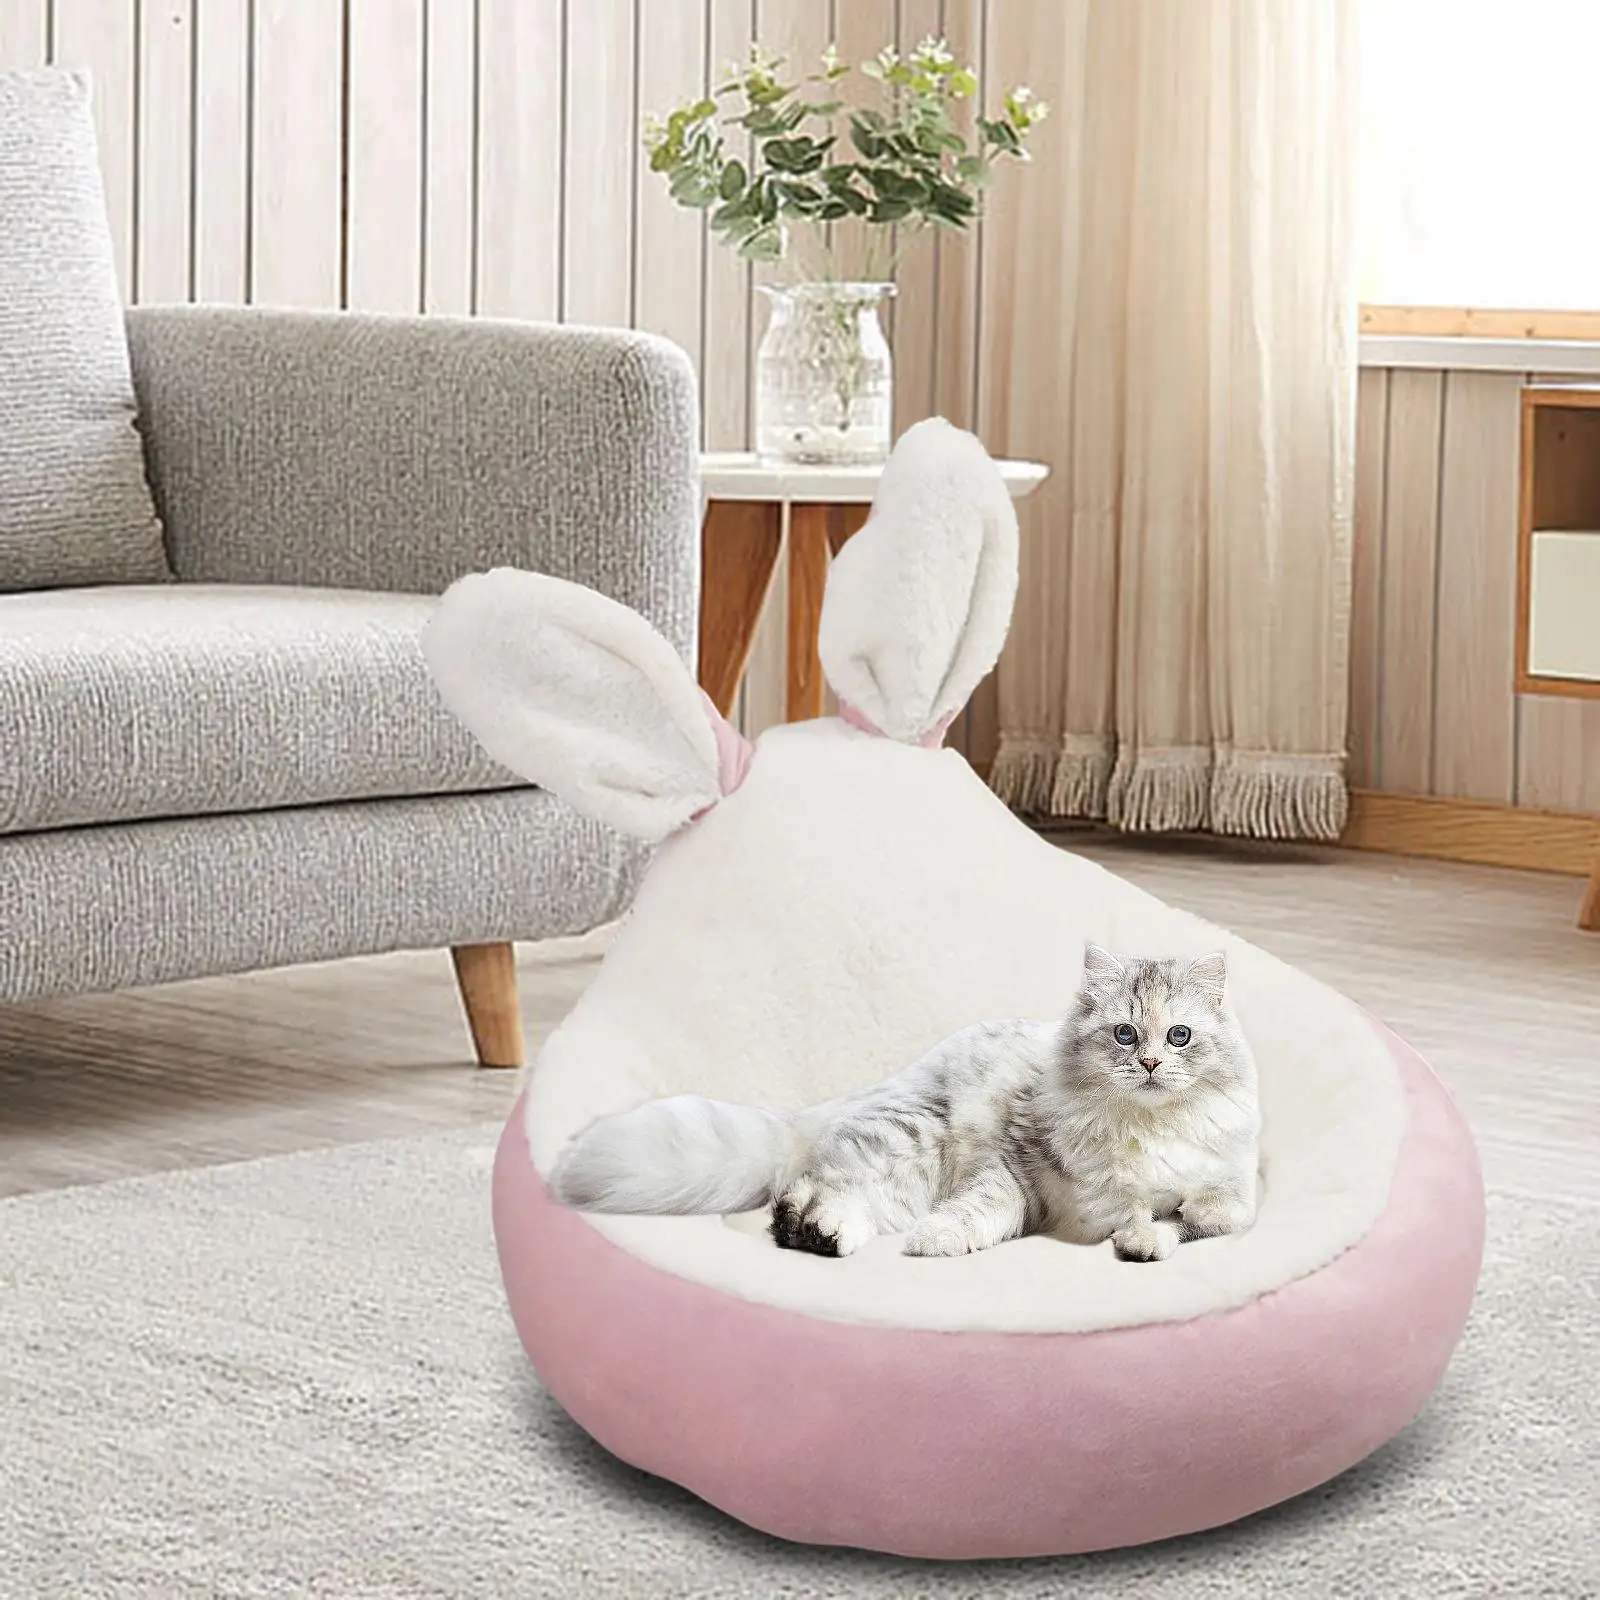 Dog Bed Anti Slip Bottom Cat Sleeping Pad Cushion Comfortable Winter Warm Nest Self Warming Pet Bed Puppy Kennel for Indoor Cats